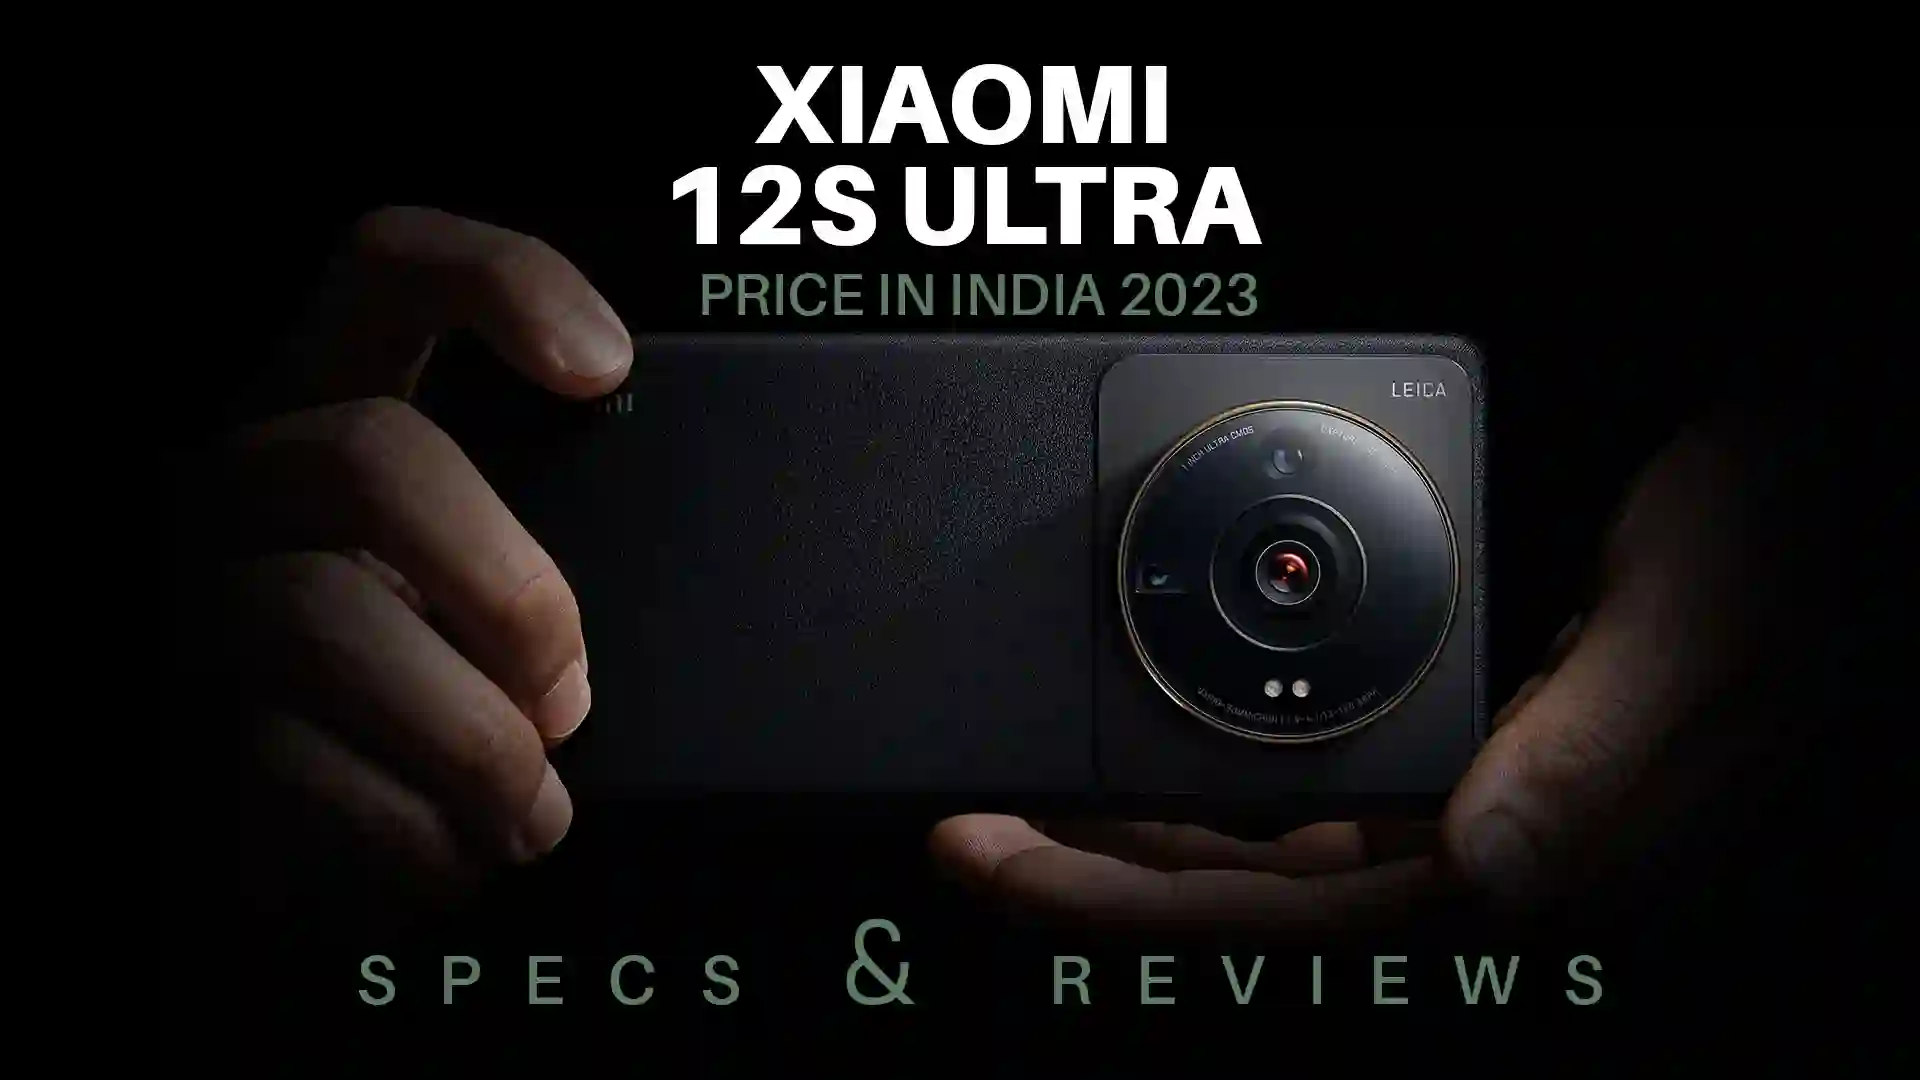 Xiaomi 12S Ultra Price in India 2023, Specs & Reviews